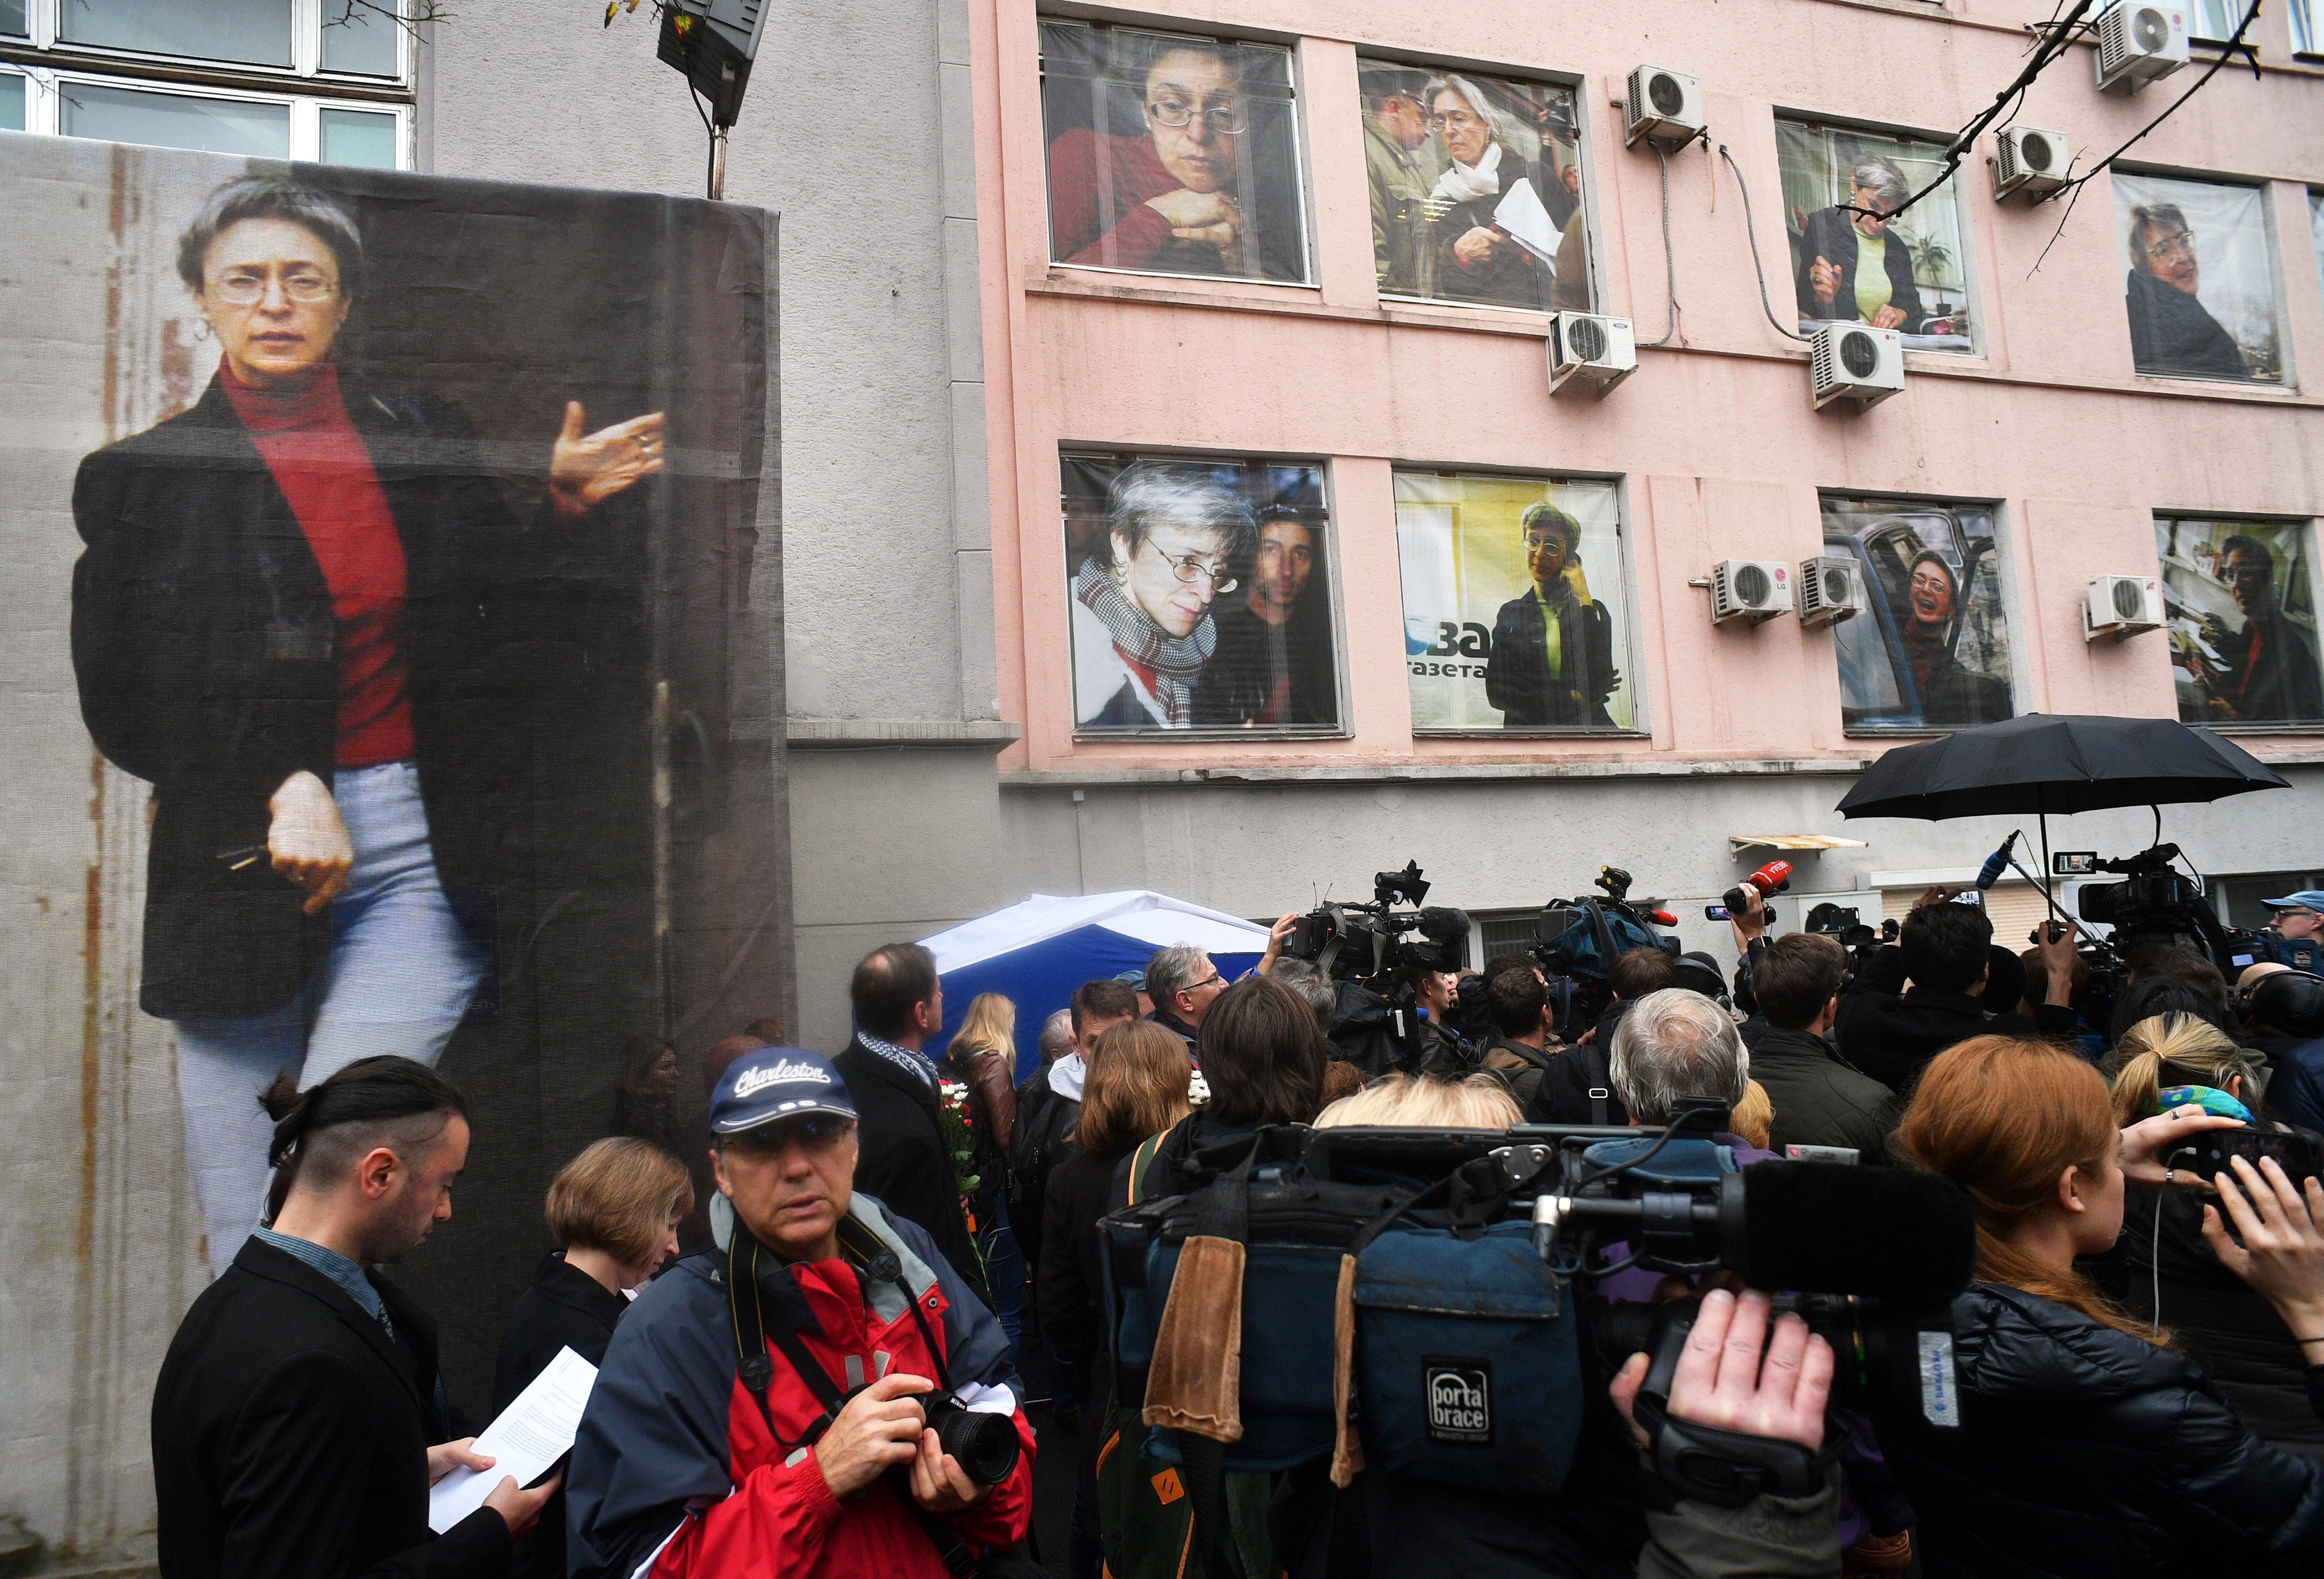 Ten giant portraits are posted on the windows of the Novaya Gazeta editorial office during a commemorative event marking the 10th anniversary of journalist Anna Politkovskaya death, Oct. 7, 2016.